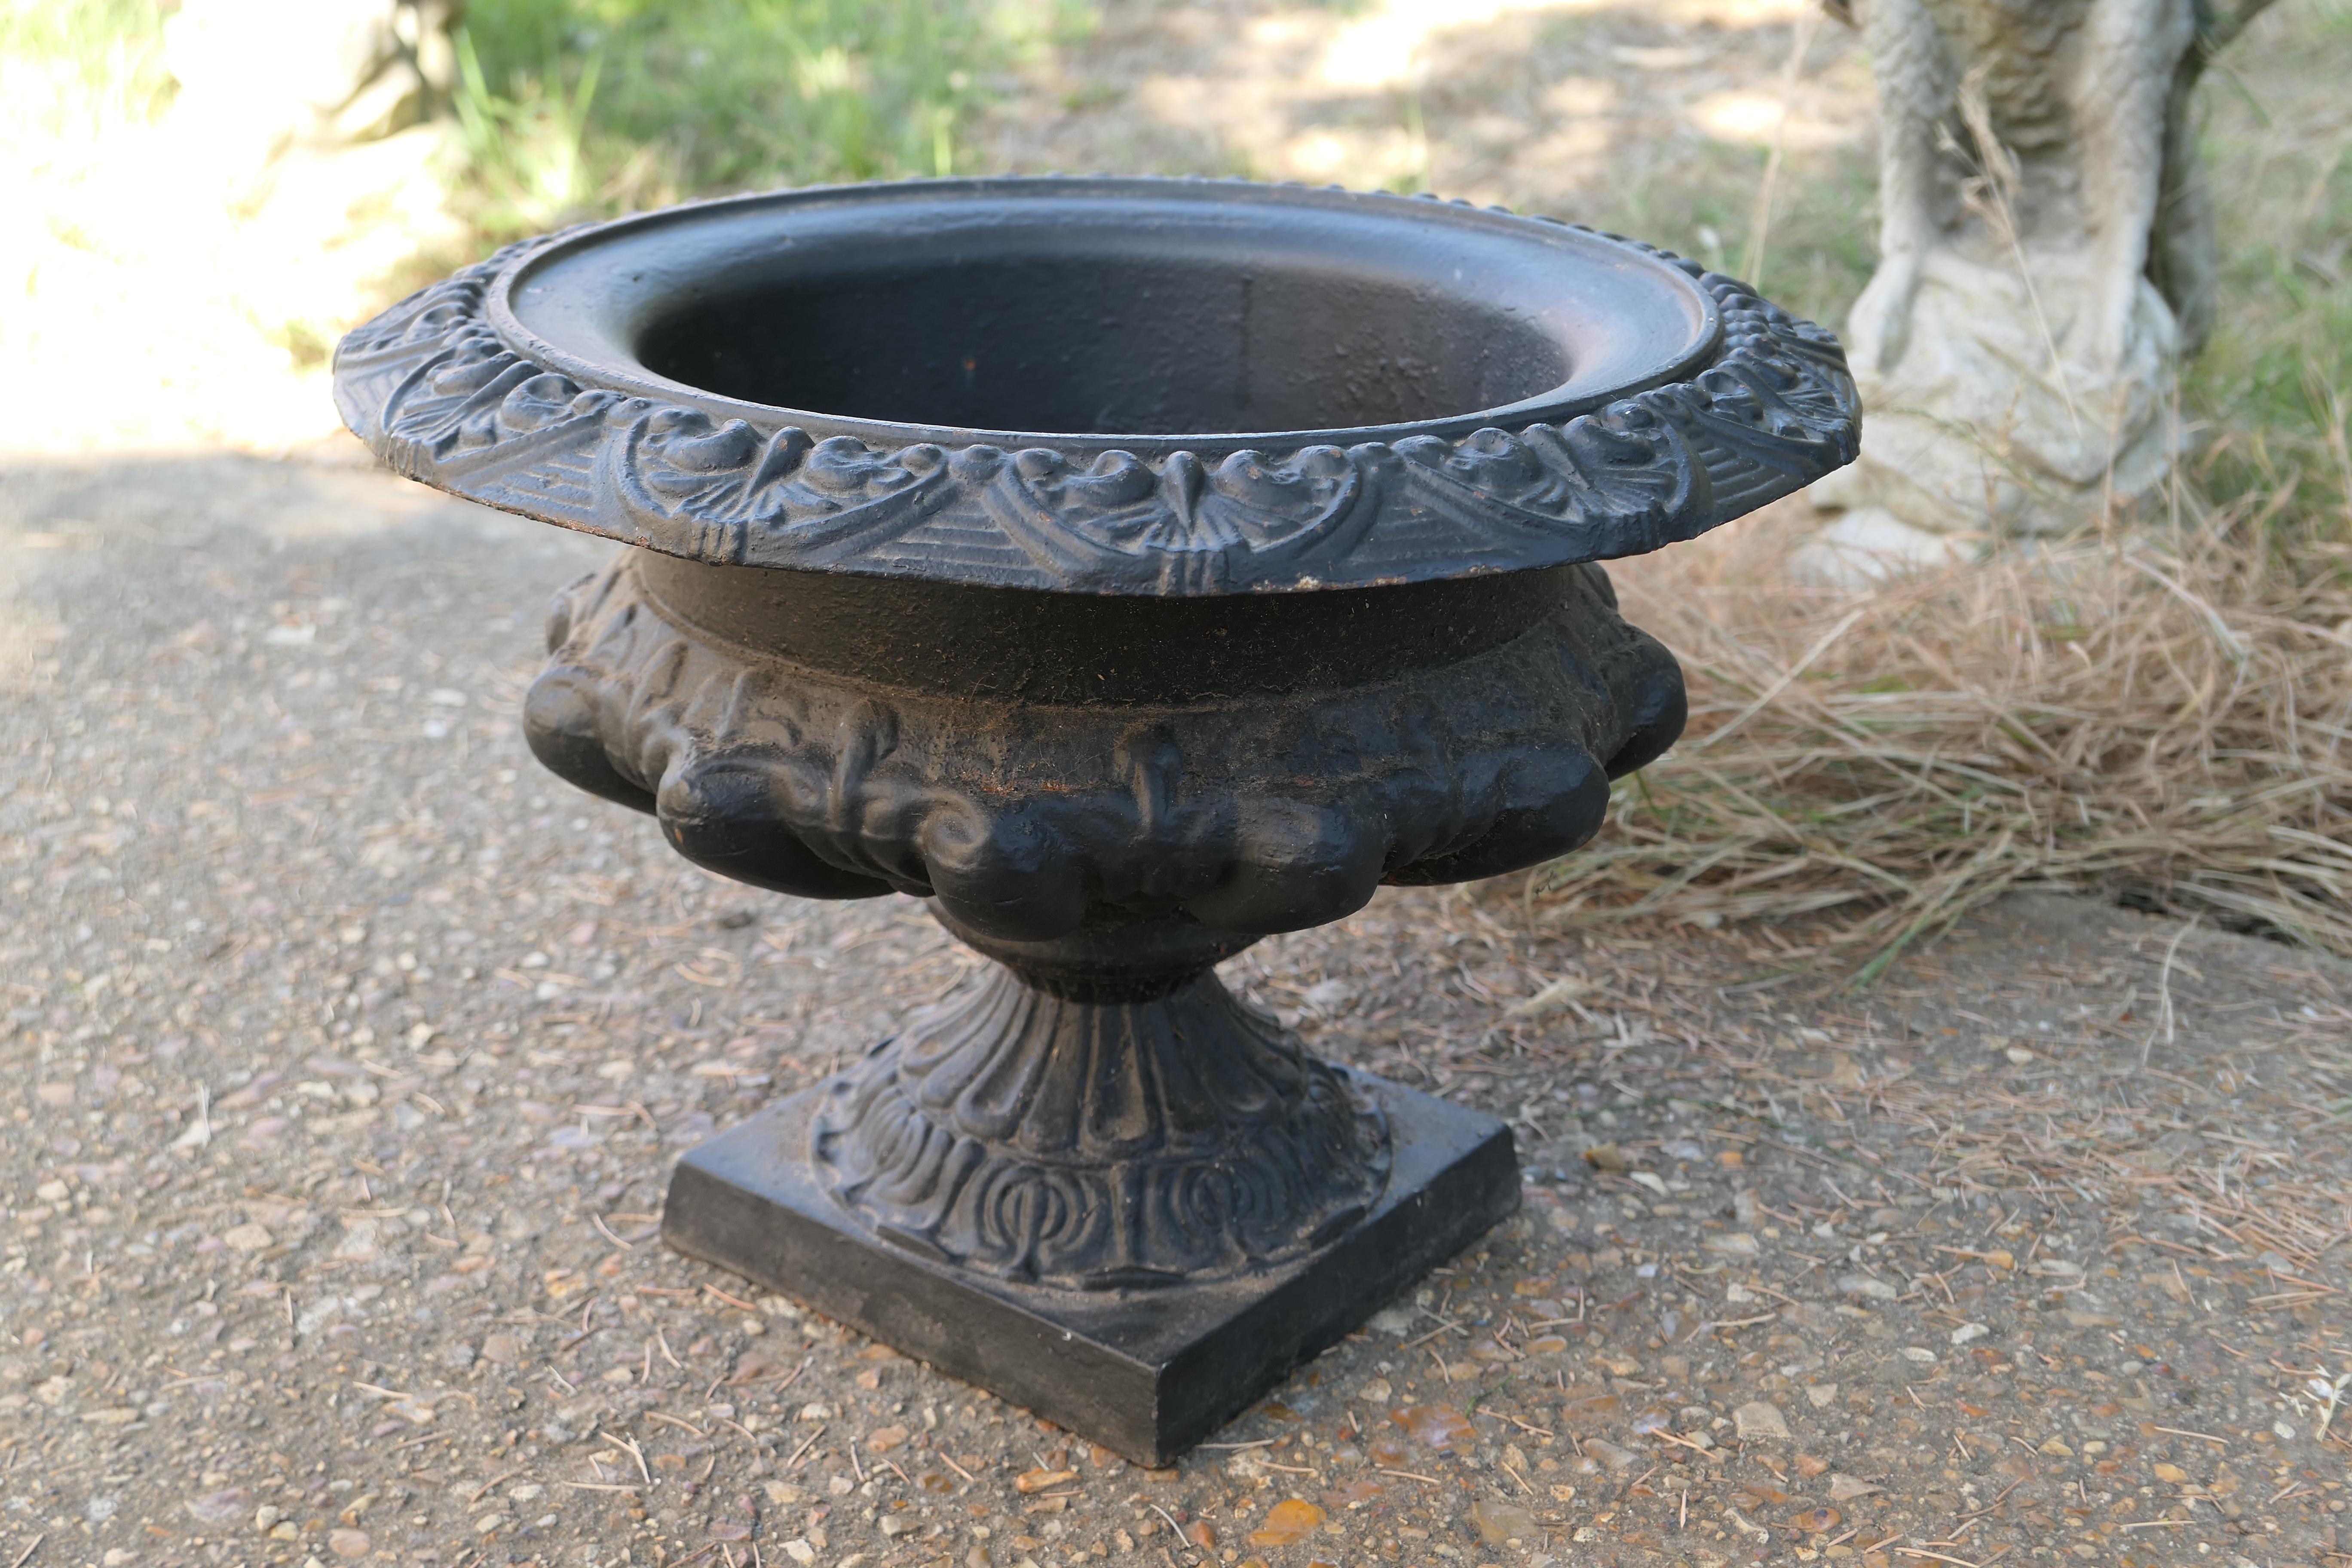 Wide Cast Iron Urn, garden planter

This is a superb large urn on a plinth, the urn is cast iron with its own plinth
The urn and stand is in very good condition it is weather worn and has slightly rusty paint which has protected it from the